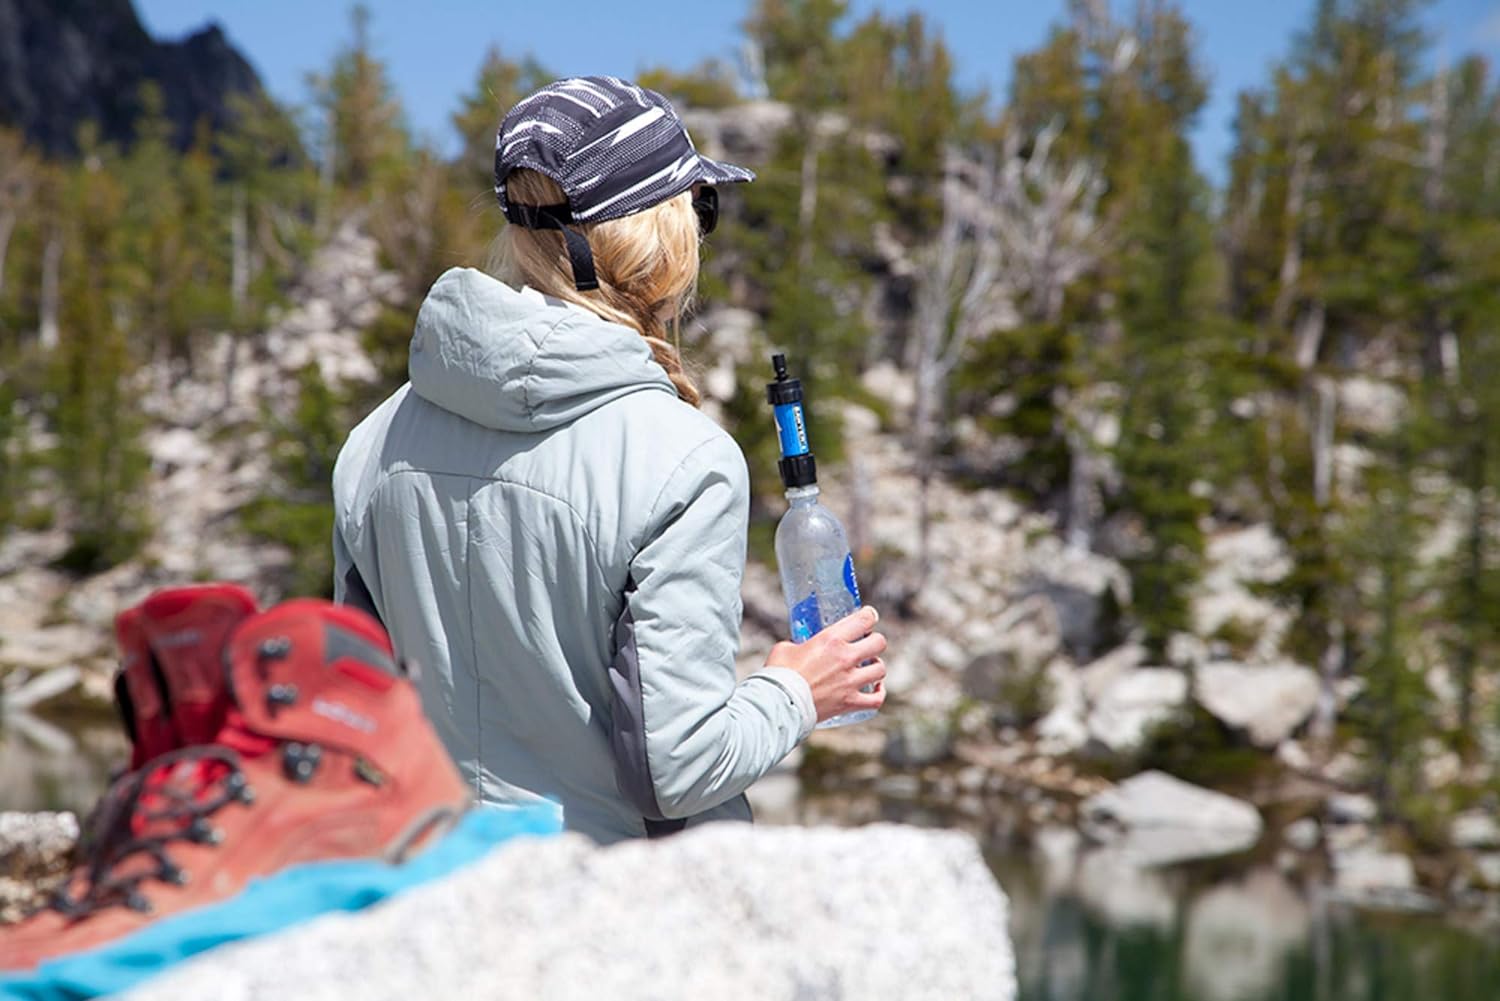 A person using a Portable Water Filter to fill a bottle from a pristine alpine lake, with hiking boots and rugged terrain in the foreground.